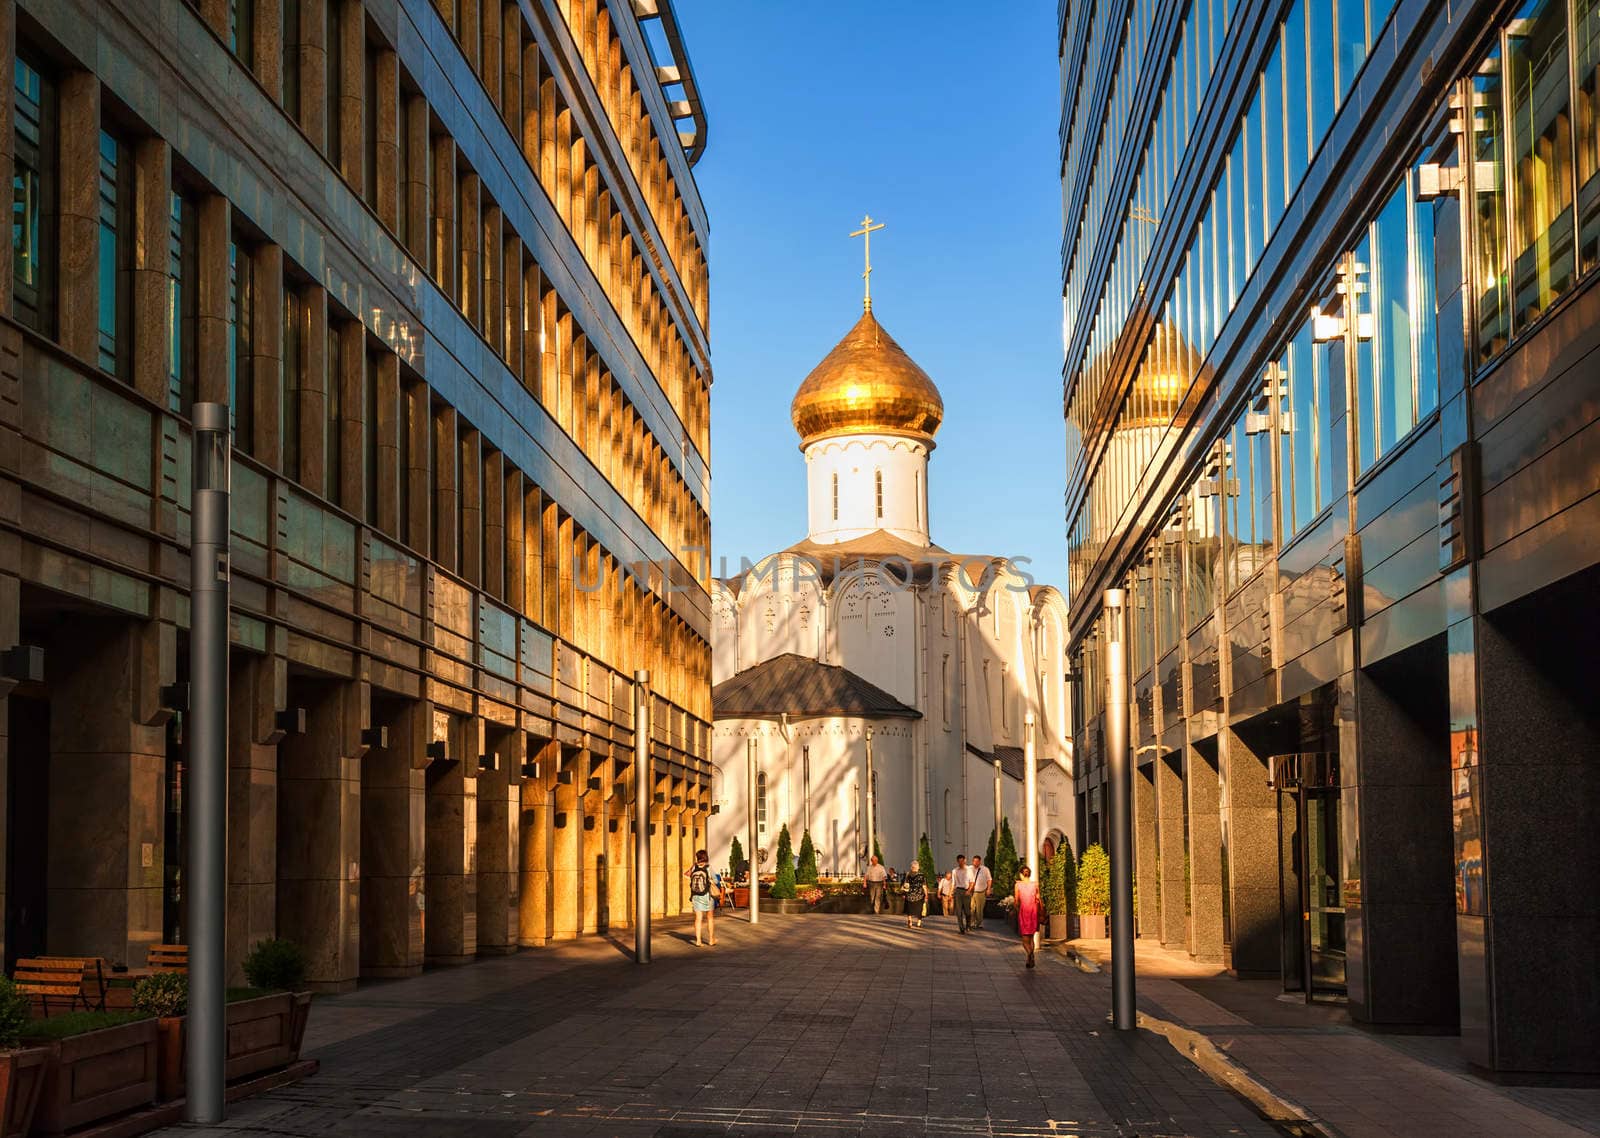 Orthodox church among the office buildings in Moscow, Russia